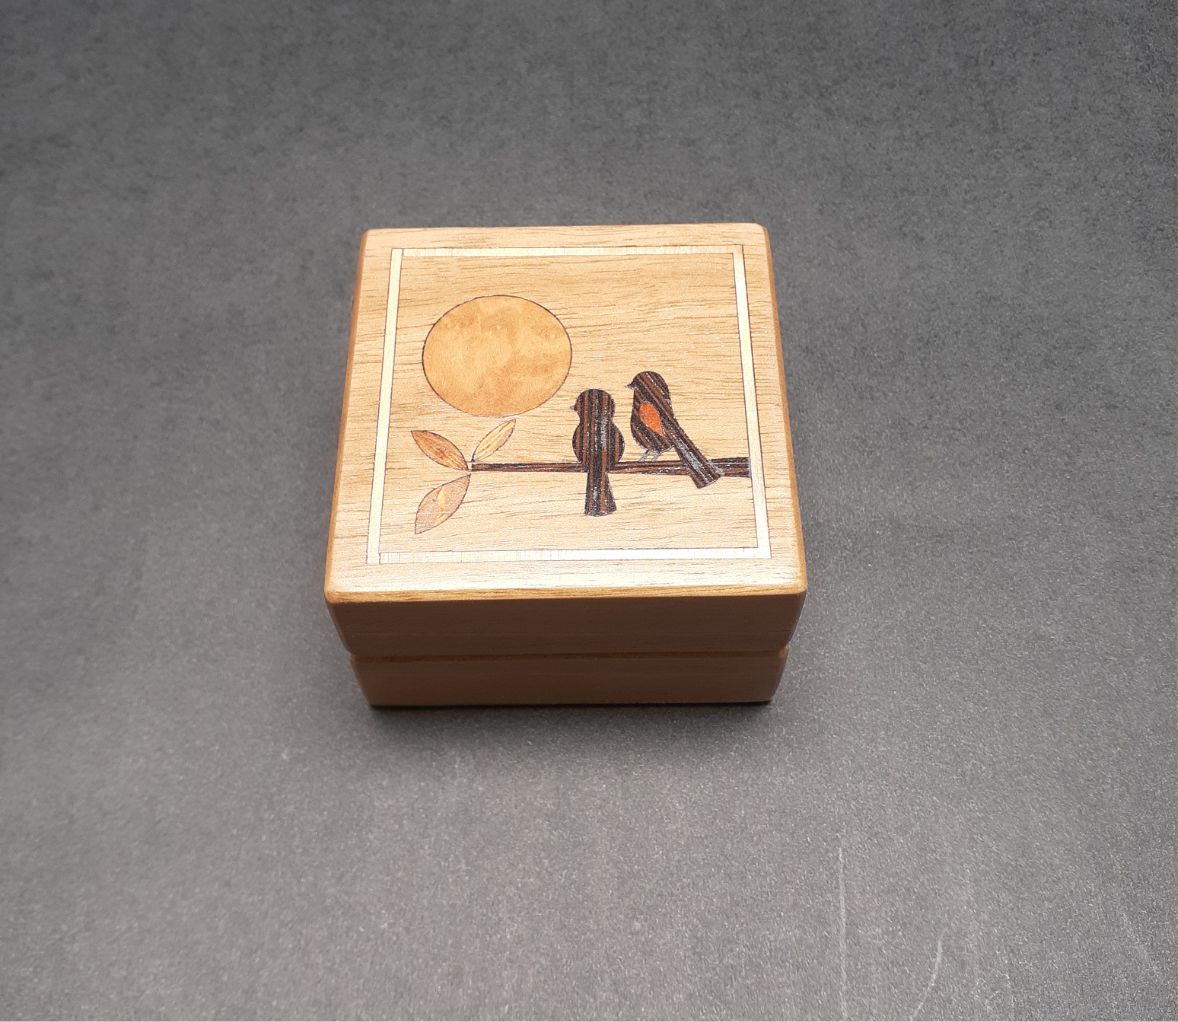 Handcrafted Walnut Ring Box "Two Birds and the Moon" RB-34   Made in the U.S.